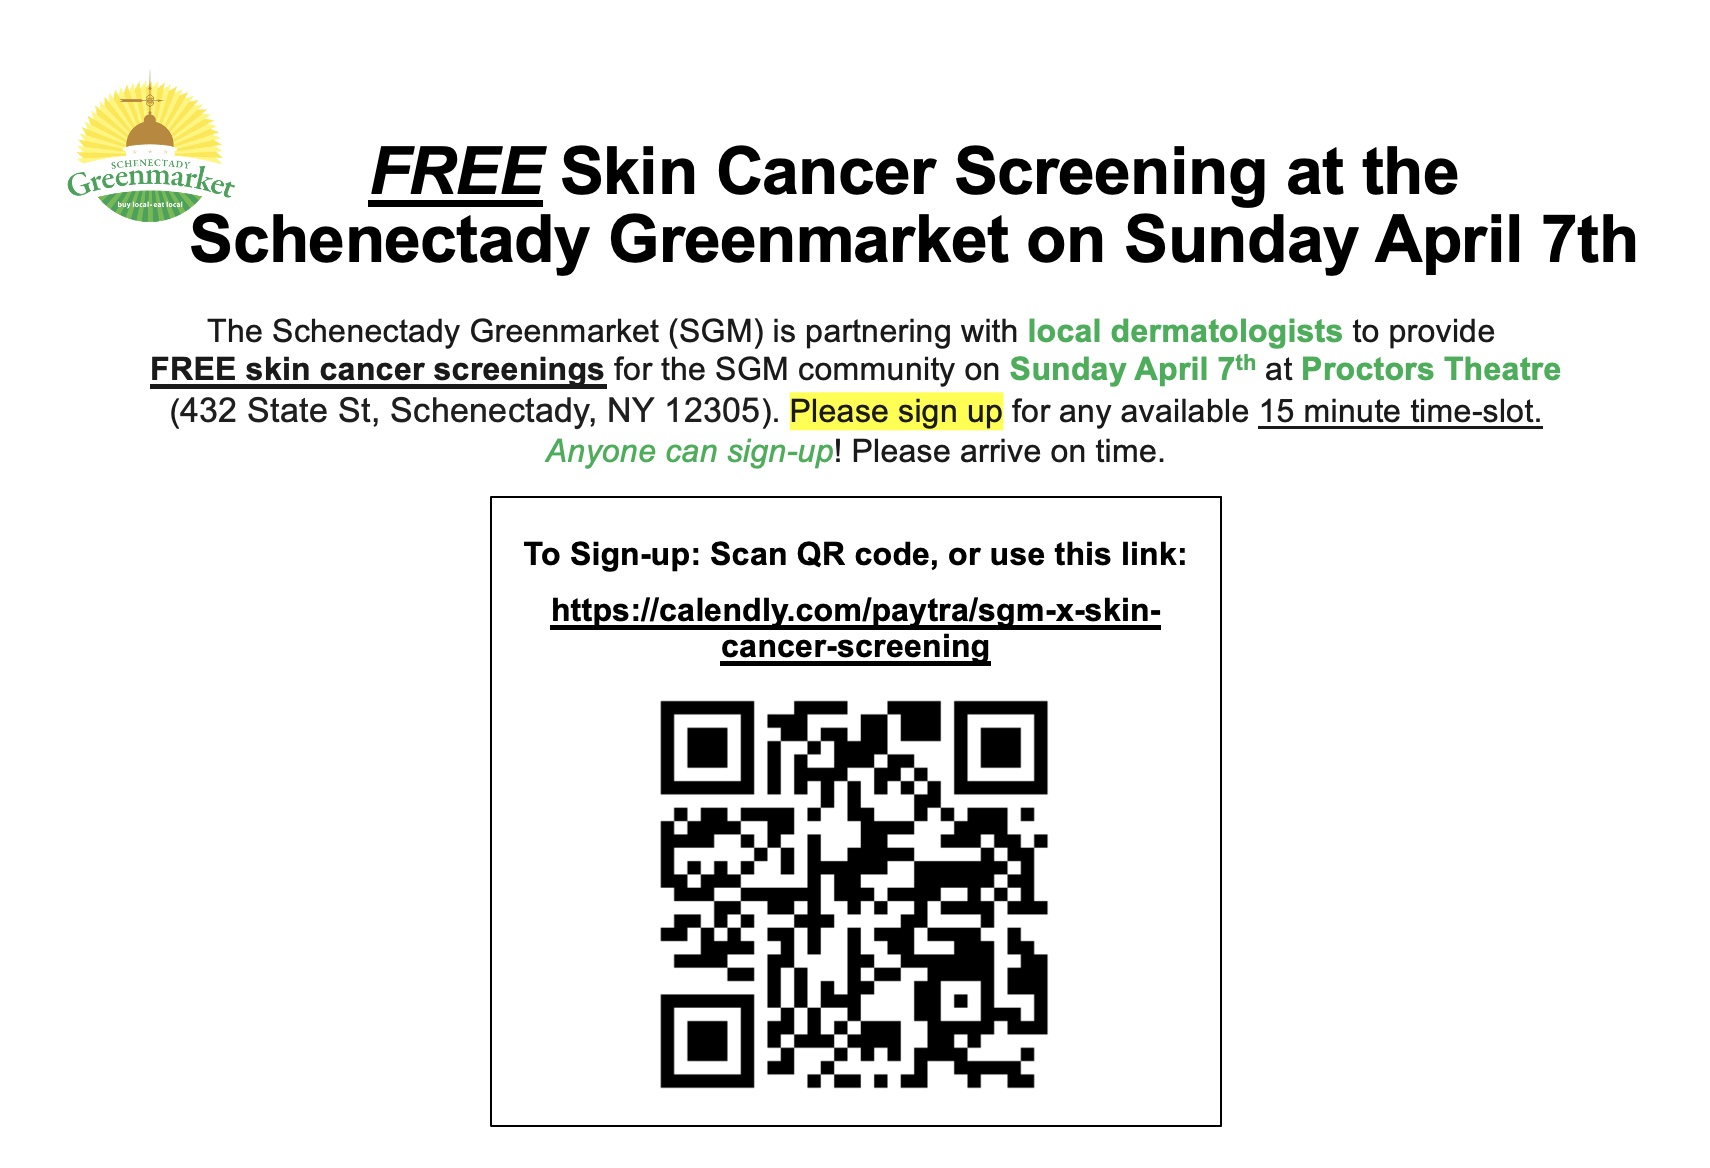 FREE Skin Cancer Screening Event at the Schenectady Greenmarket on Sunday April 7th